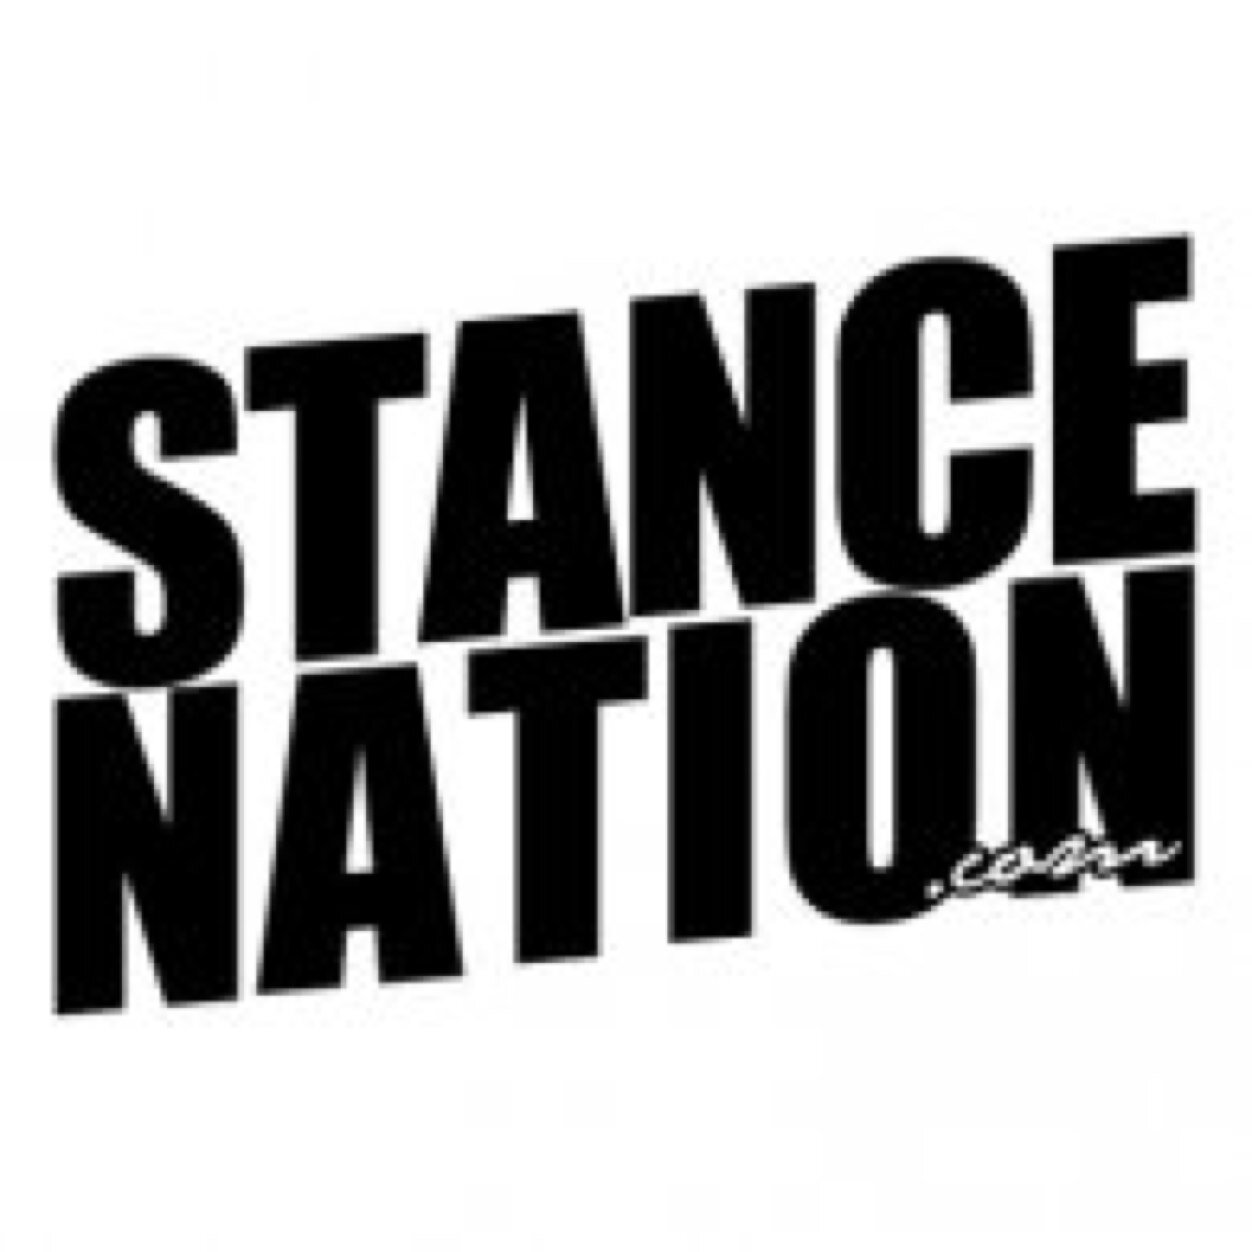 New account | http://t.co/AsKesgGAWb | bringing you the best stance nation pictures |